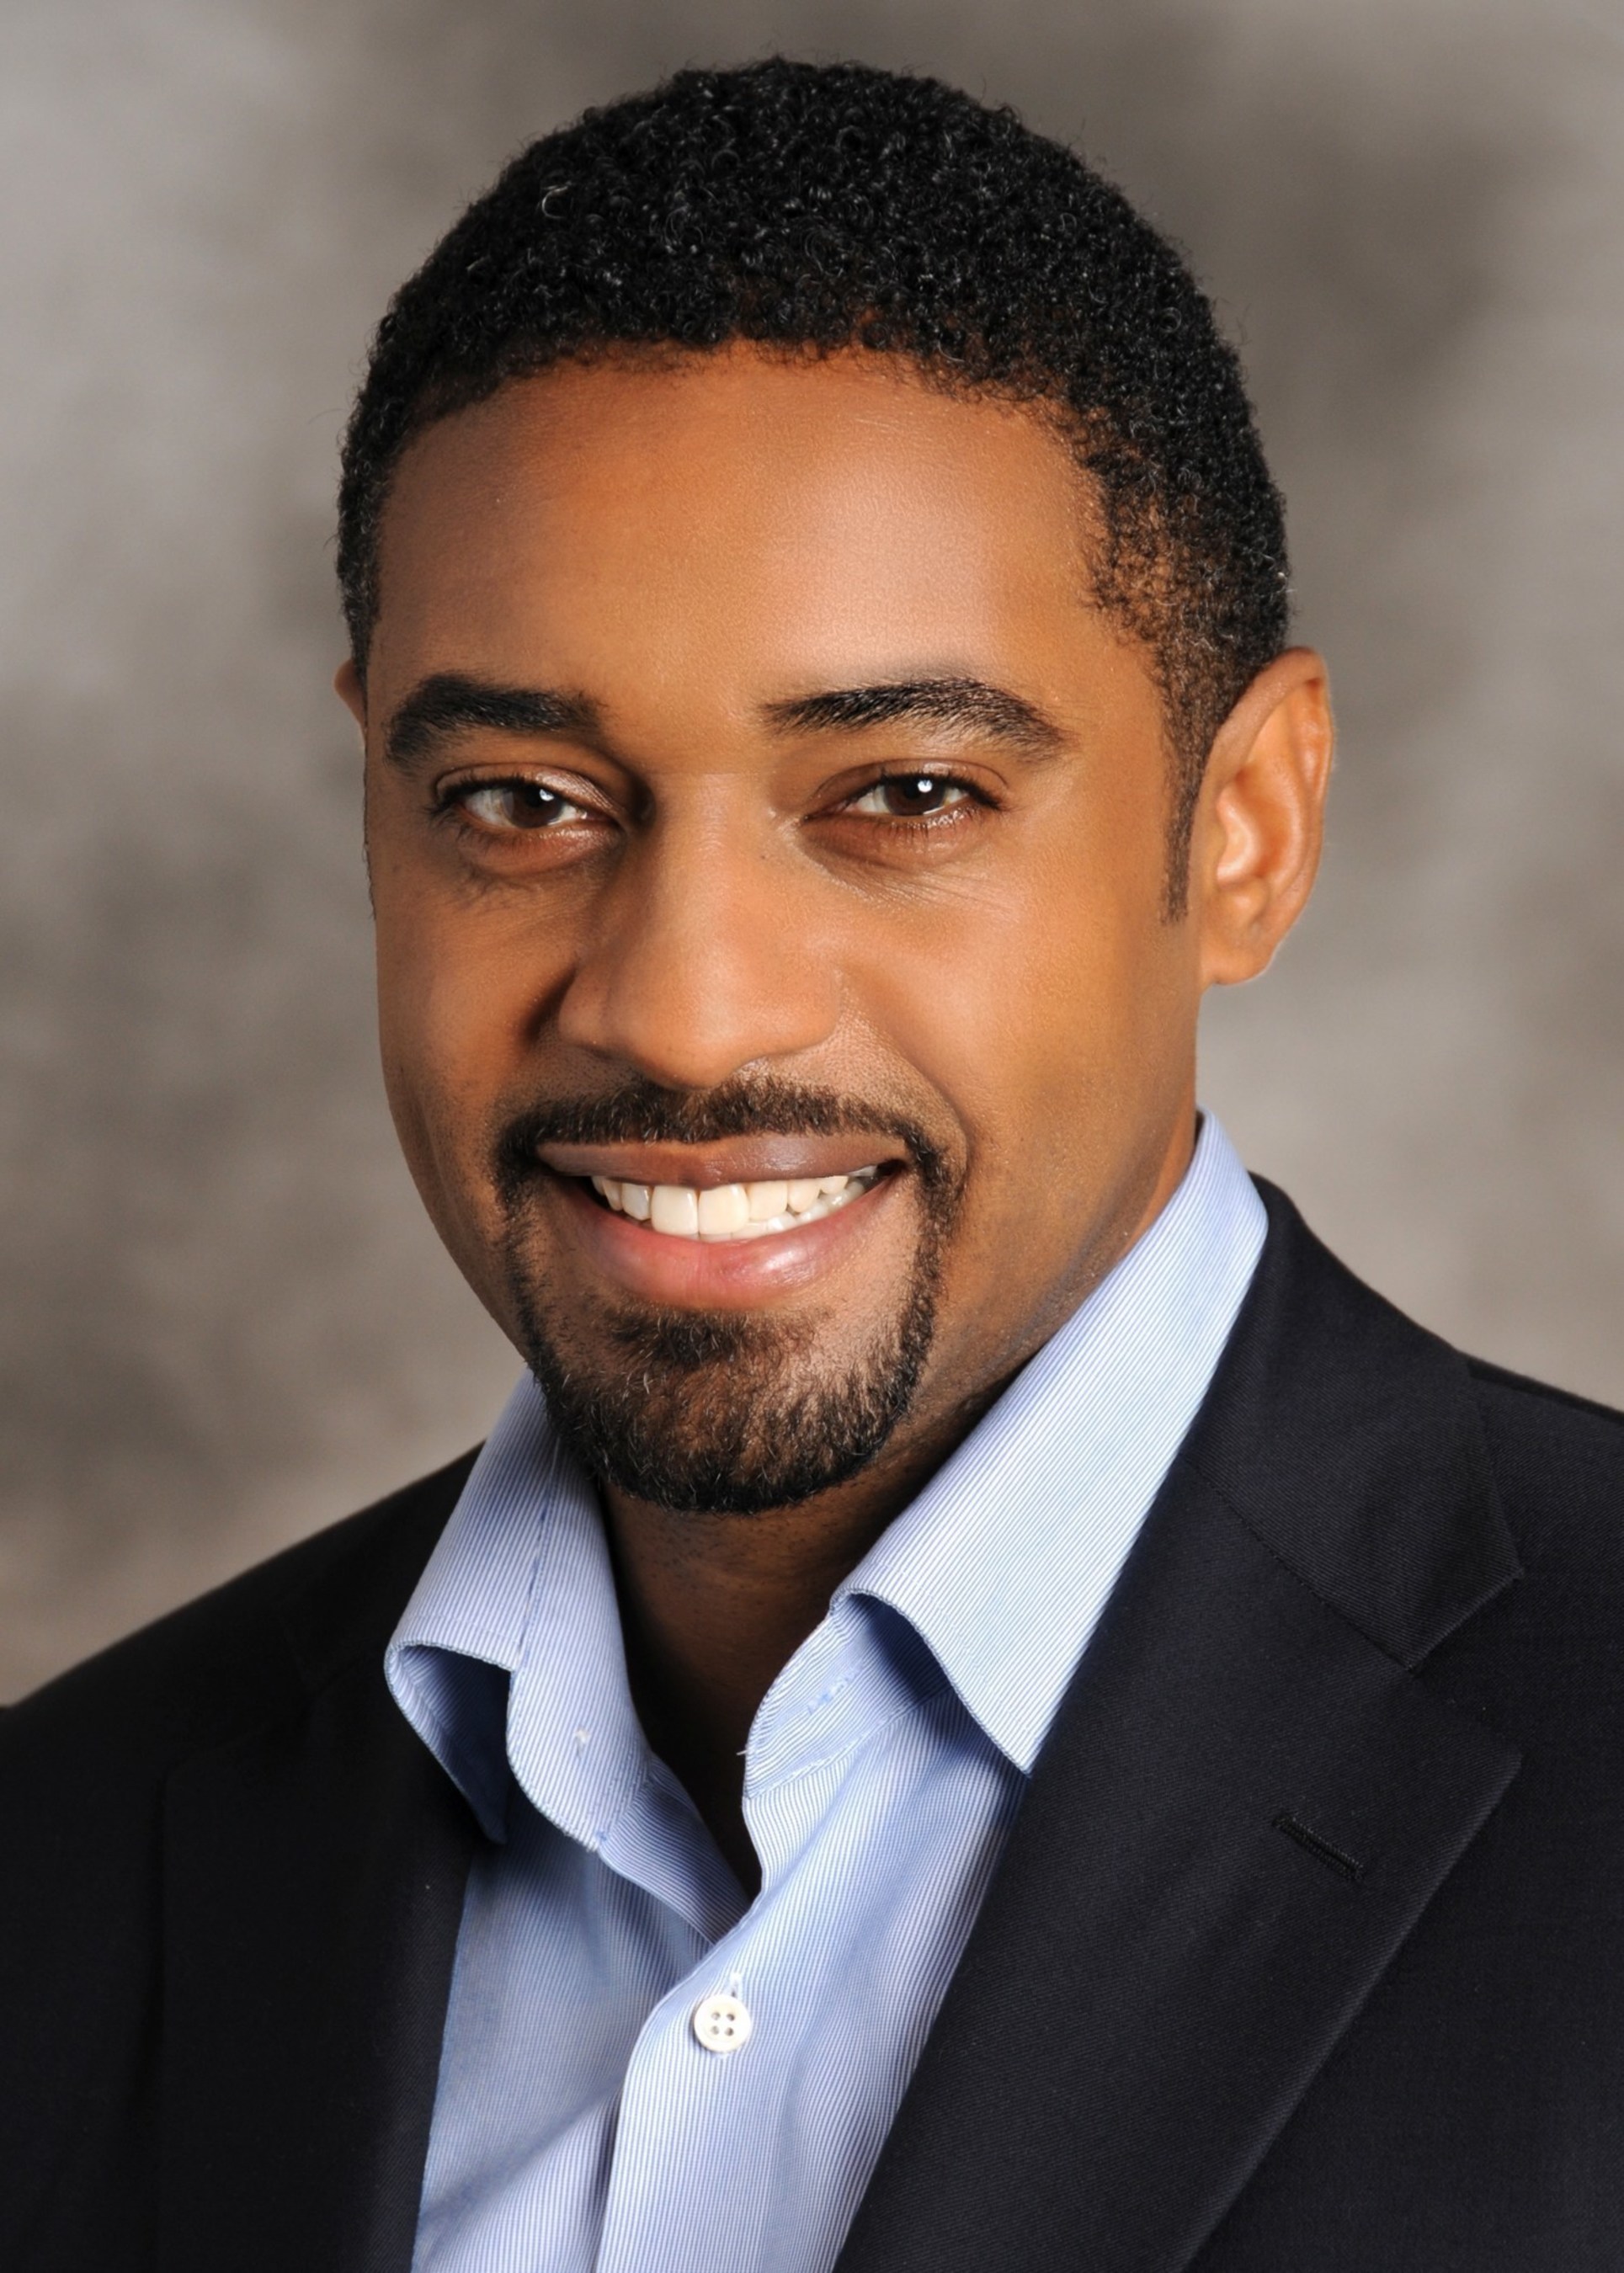 Andre Branch has joined NBTY as Chief Marketing Officer, where he will lead consumer and customer marketing efforts, as well as focus on strategies to further build NBTY's trusted and high-quality brands, including Nature's Bounty(R), Sundown Naturals(R), Ester-C(R), Solgar(R) and Osteo Bi-Flex(R).